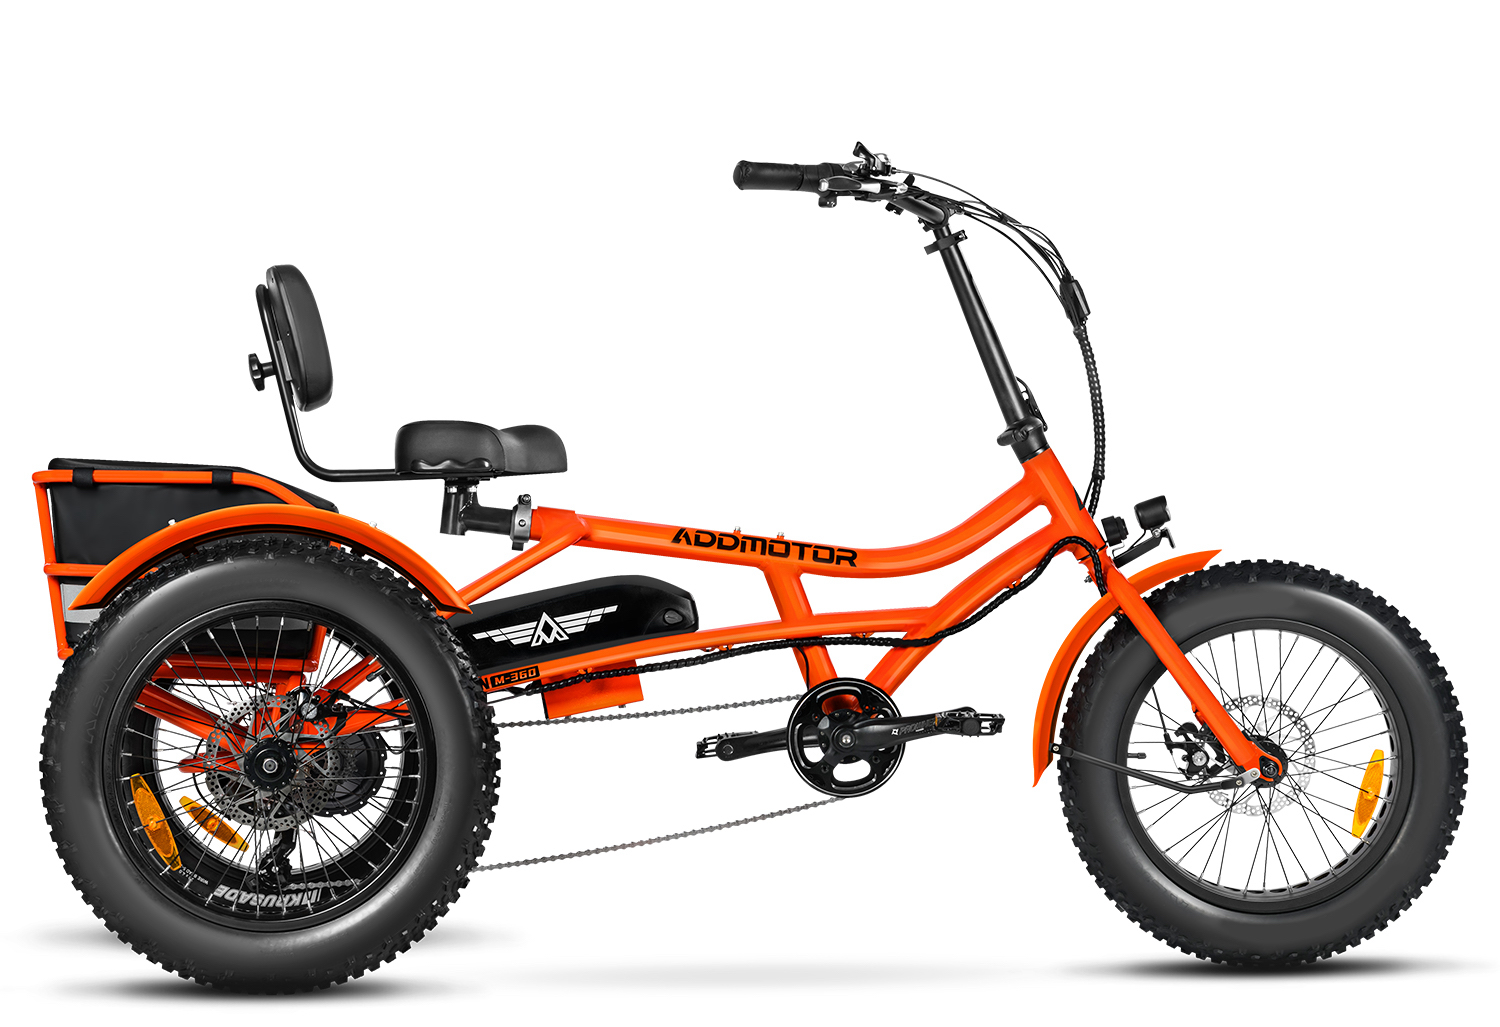 Save $900 On This Electric Fat Tire Trike From Addmotor - CleanTechnica